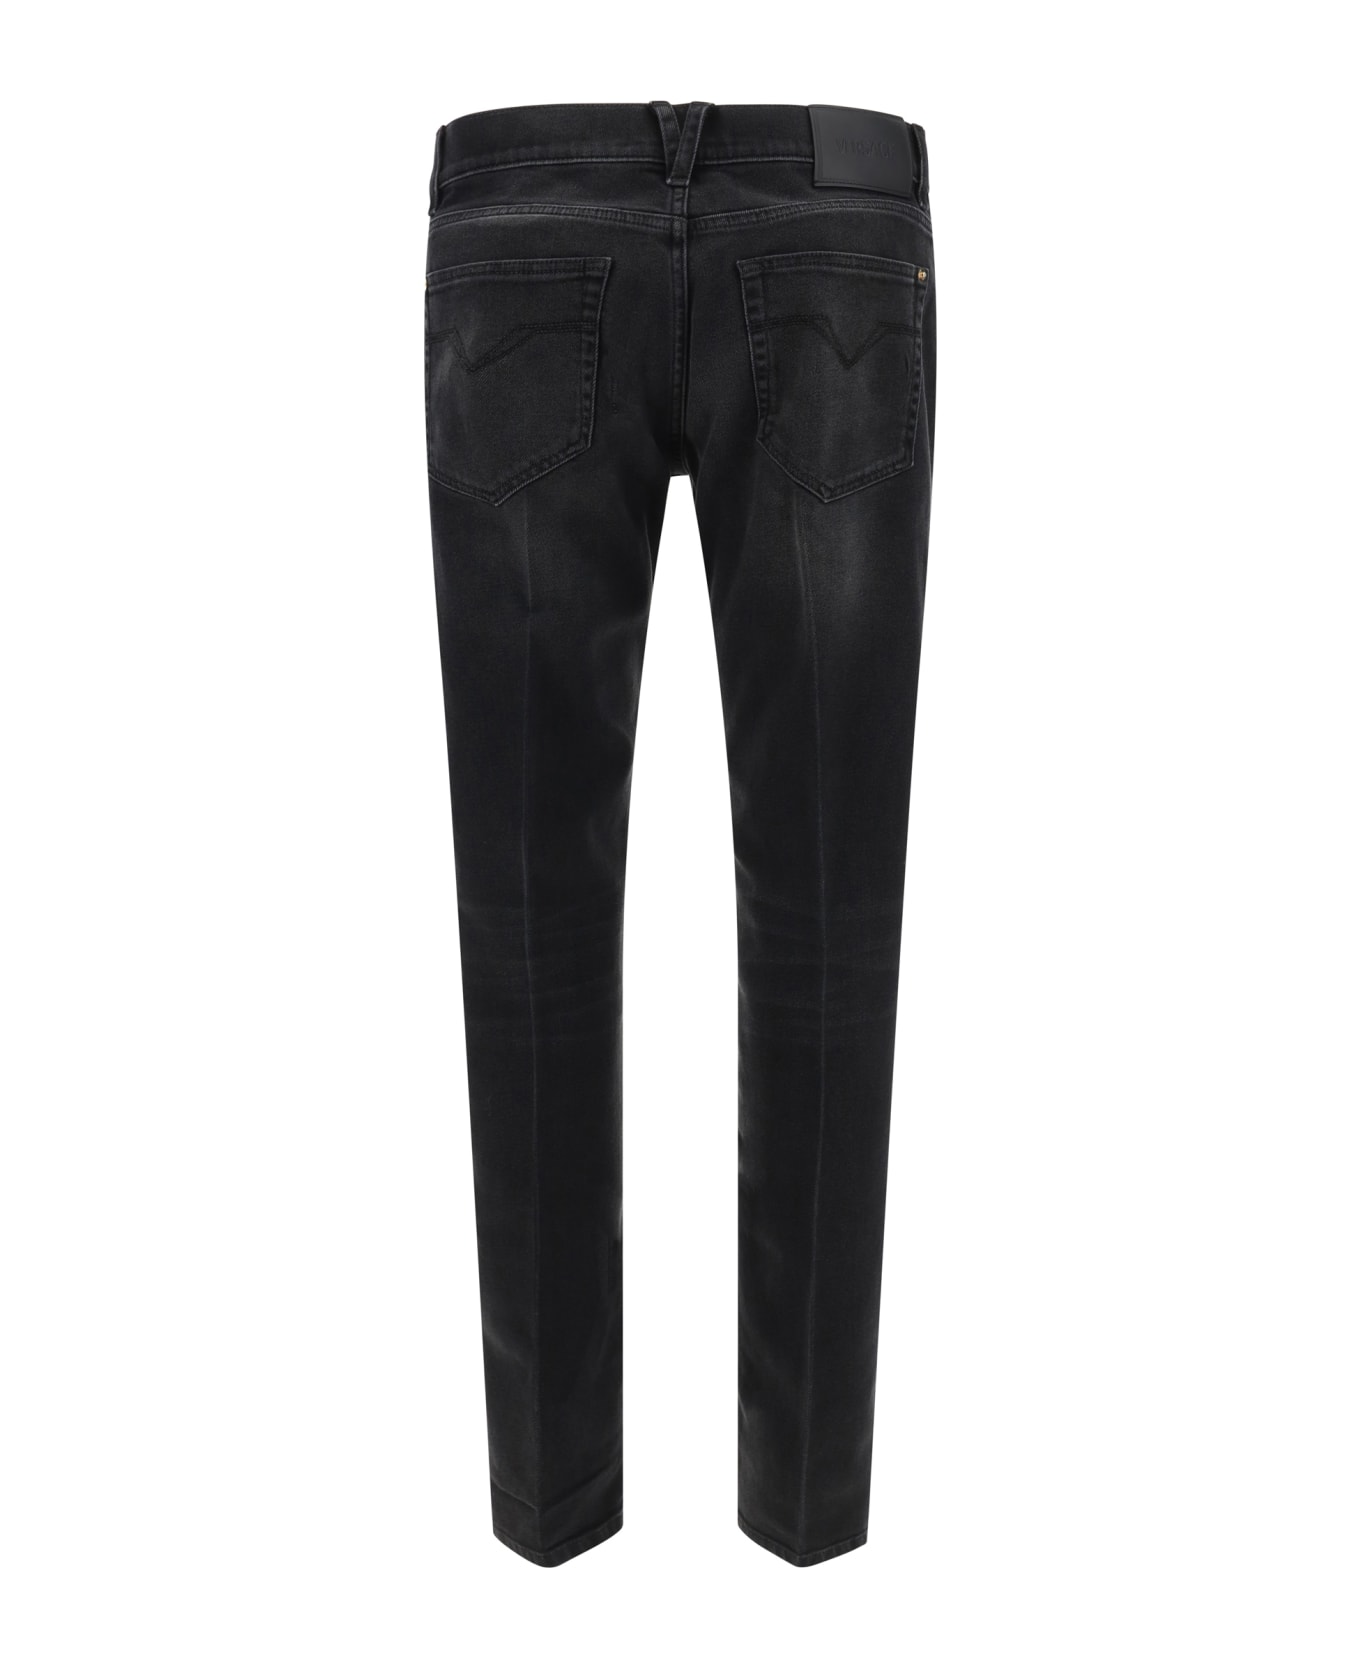 Versace Stretch Denim Slim Fit Jeans - Faded Washed Black ボトムス